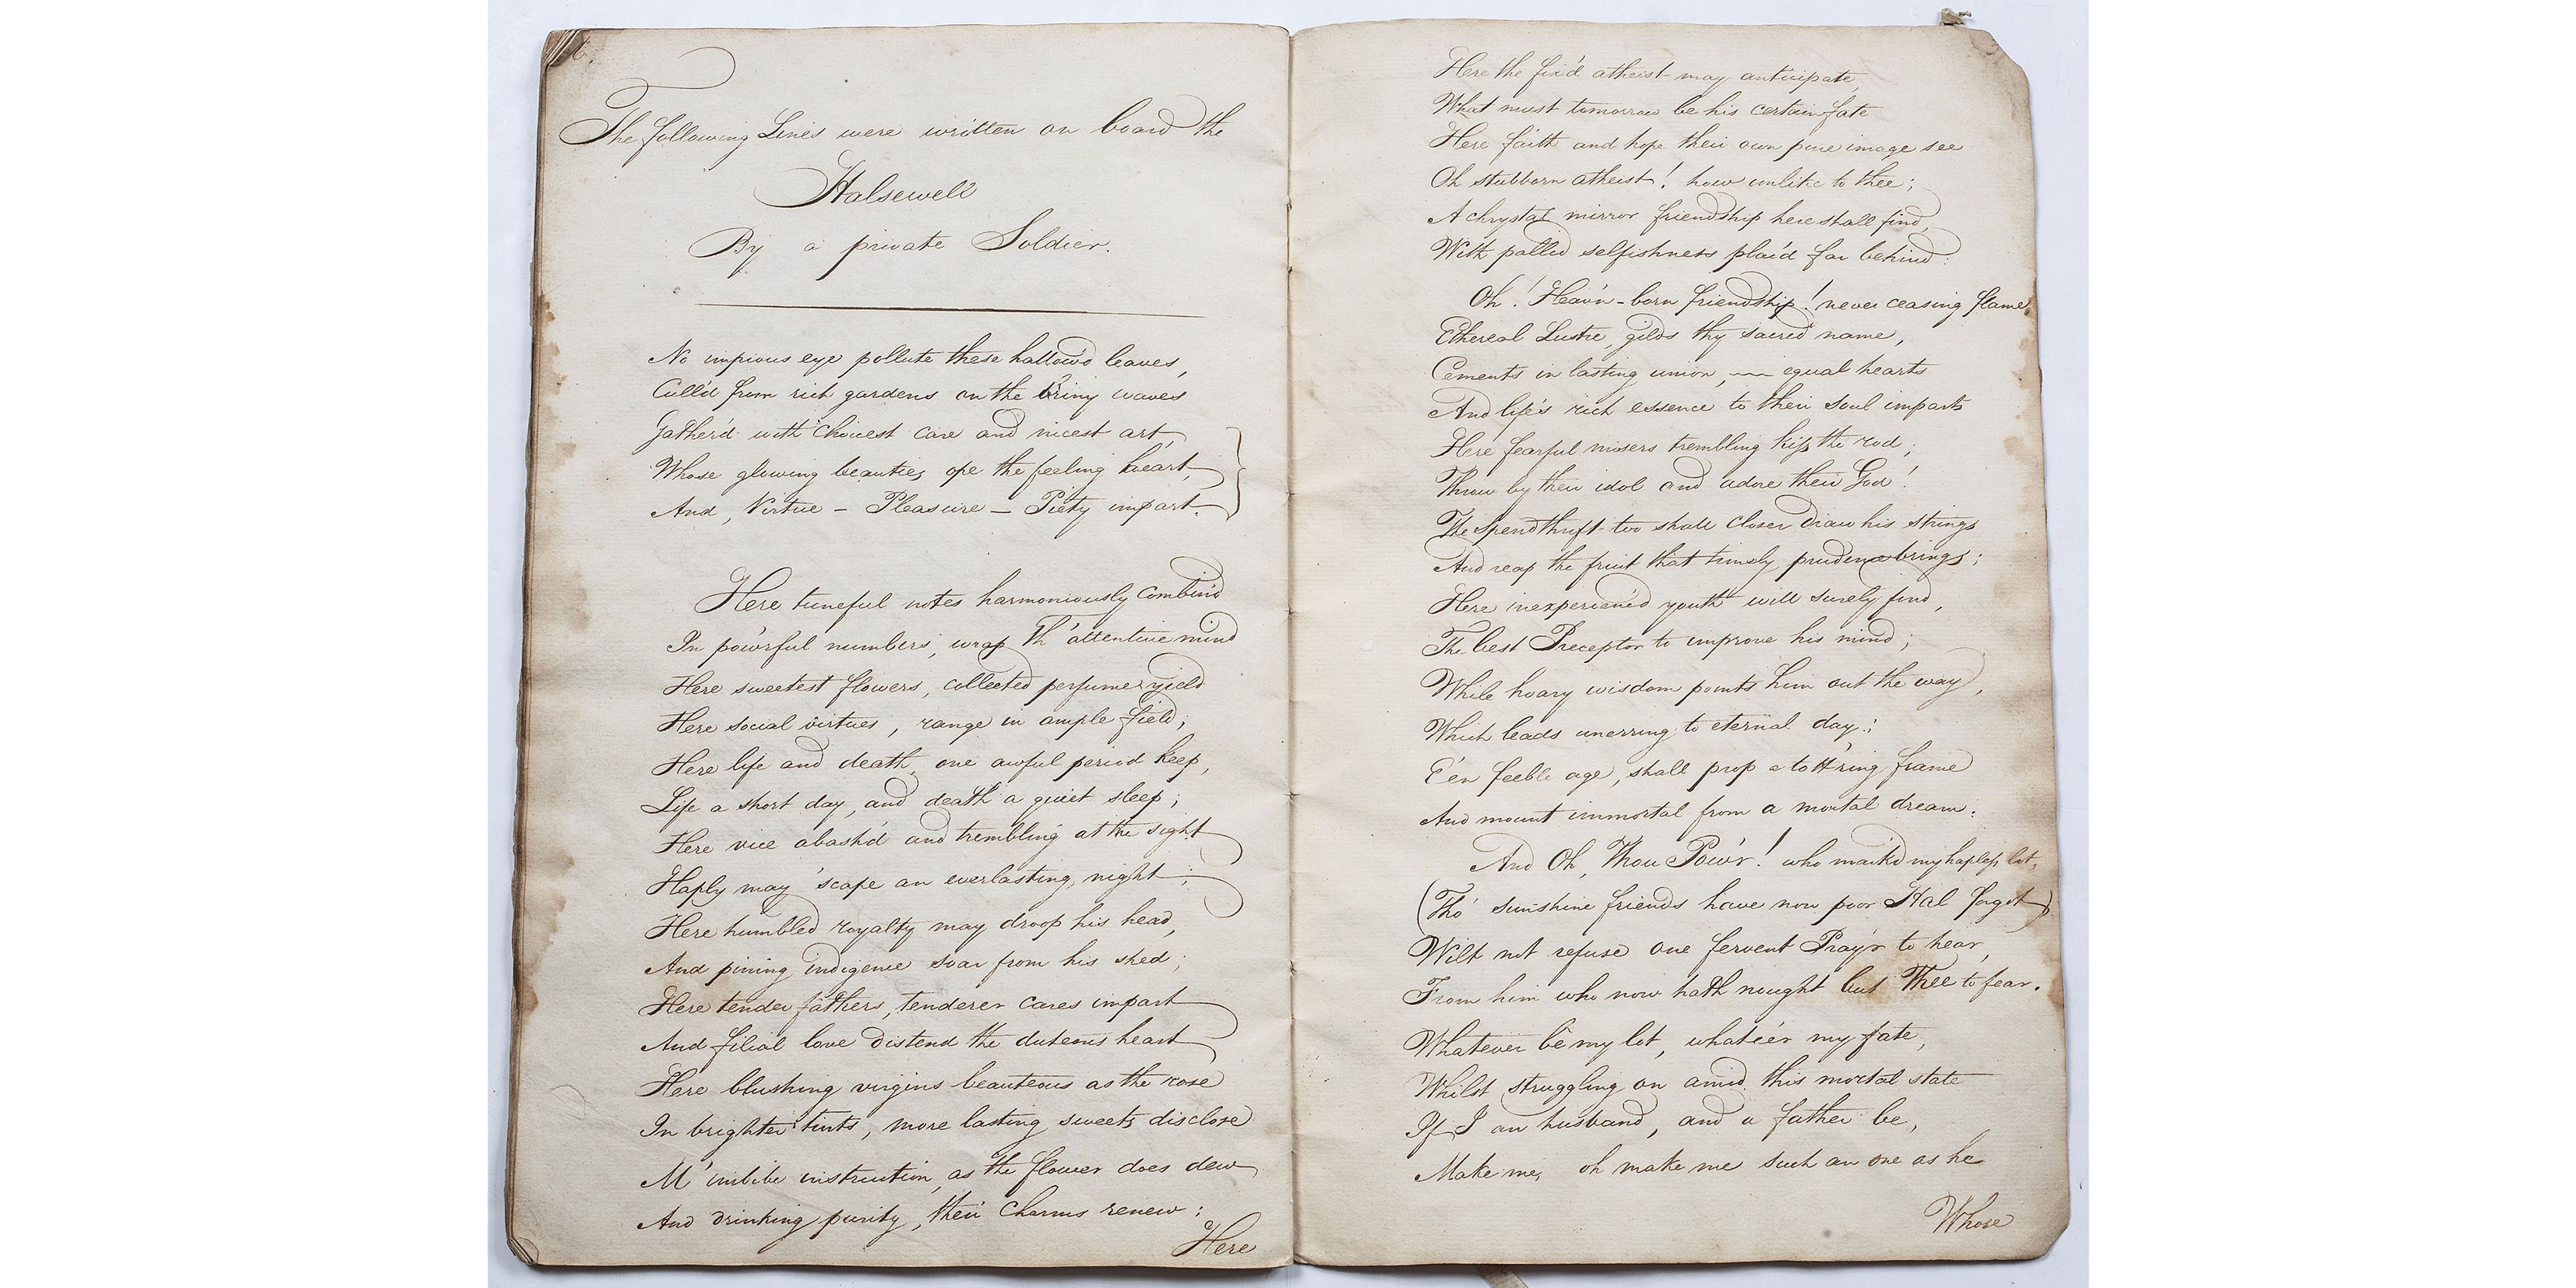 Captain Richard Pierce Manuscript to be Auctioned at Mallams' Oxford Library Sale 22-23 Sept 2022